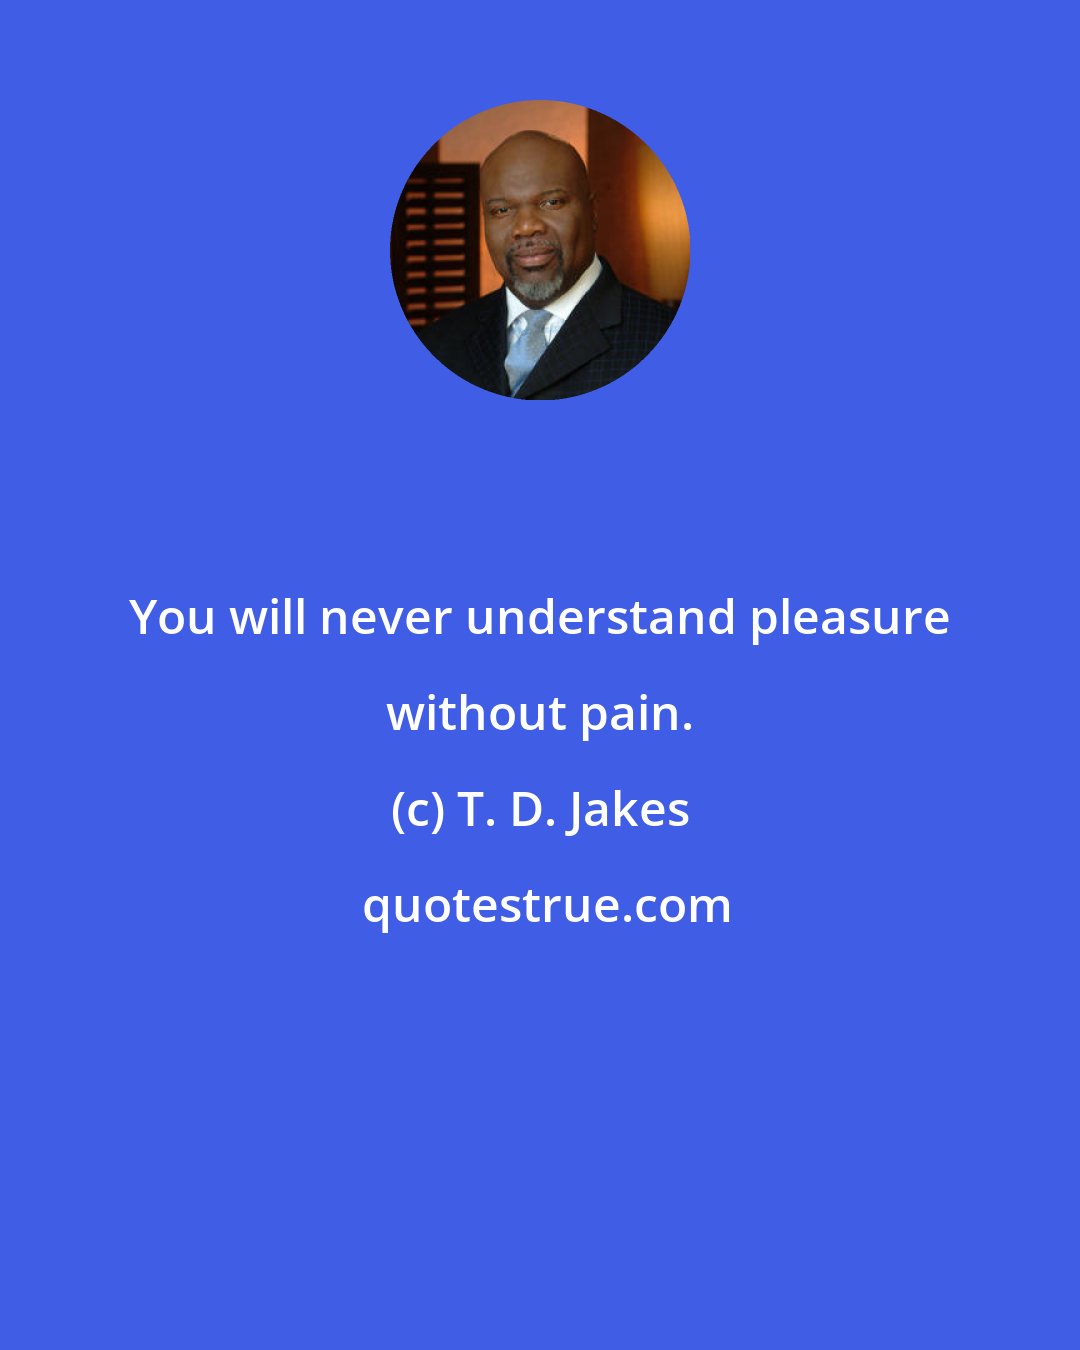 T. D. Jakes: You will never understand pleasure without pain.